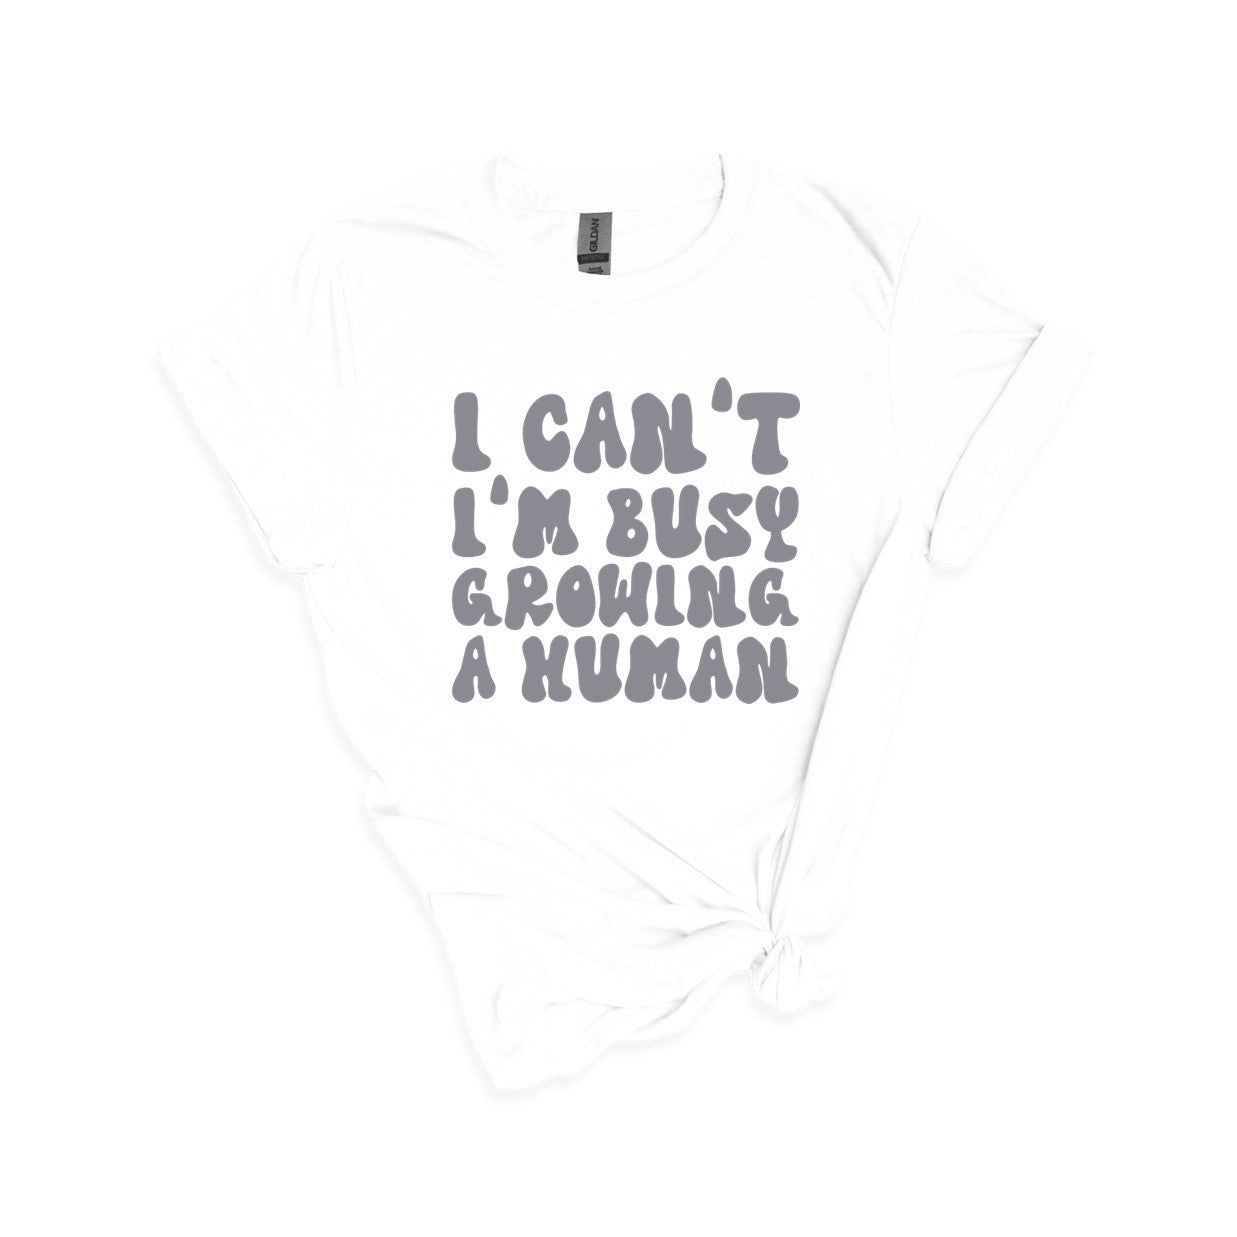 I can't.  I'm busy growing a human.  - Cute Pregnancy T-shirt